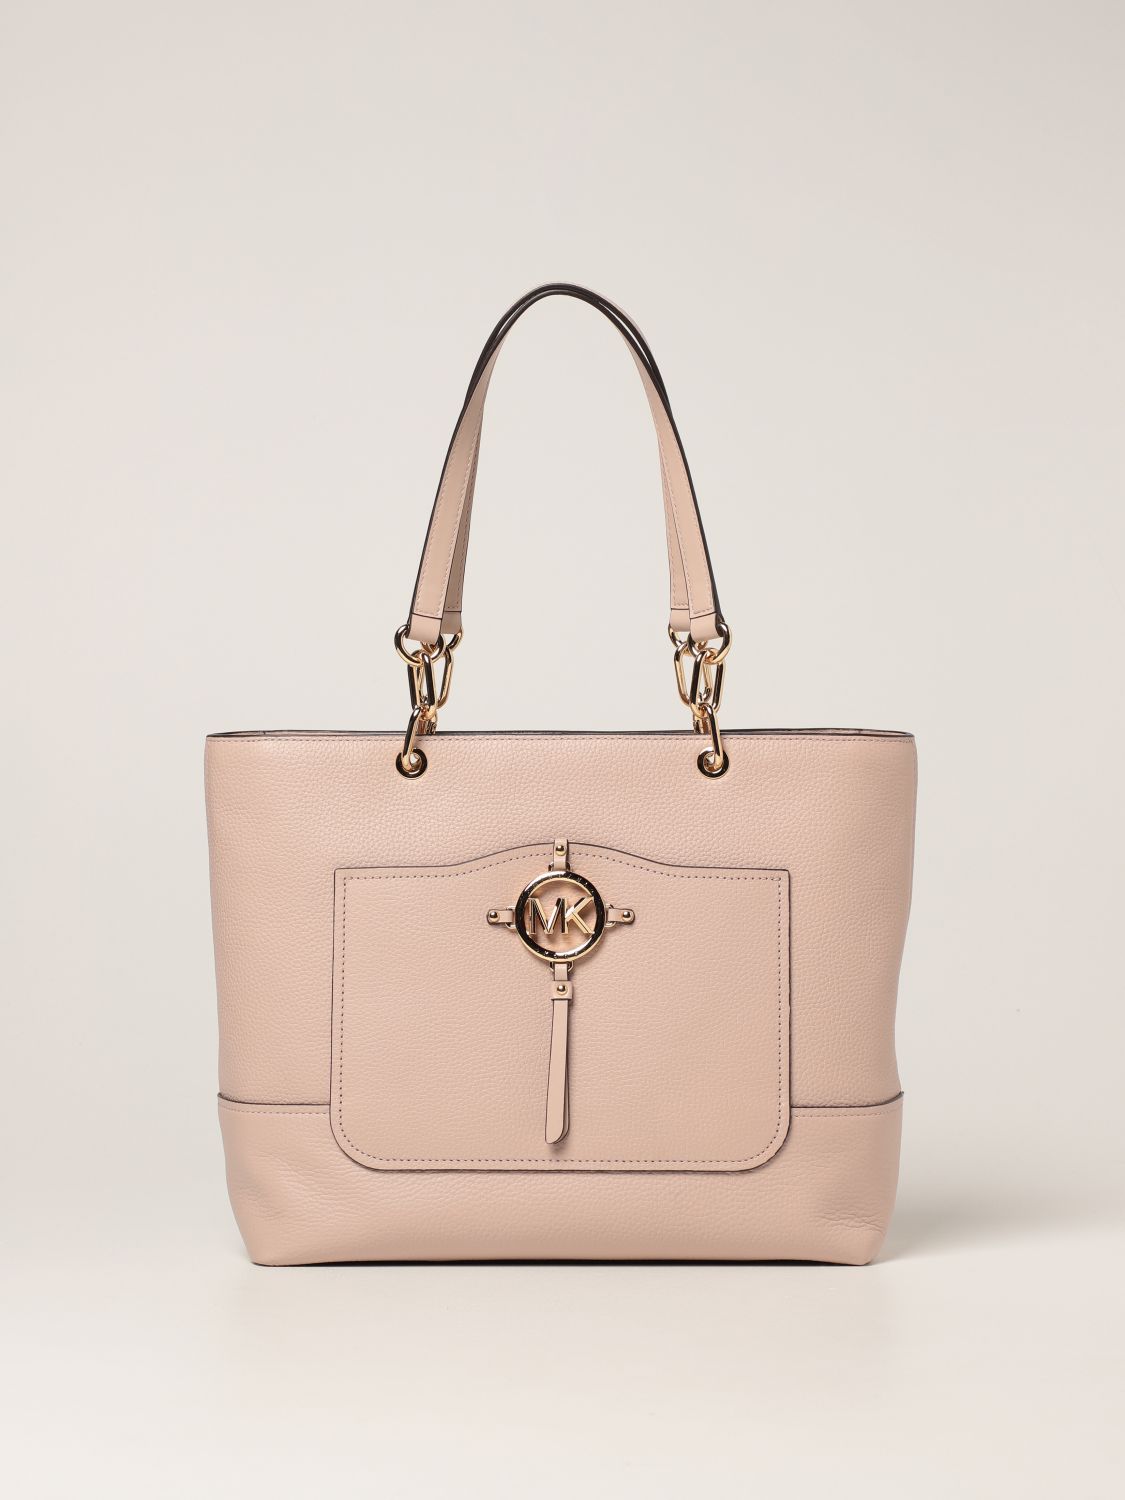 MICHAEL KORS: Amy Michael bag in textured leather - Pink | Michael Kors  tote bags 30S1G2AT3L online on 